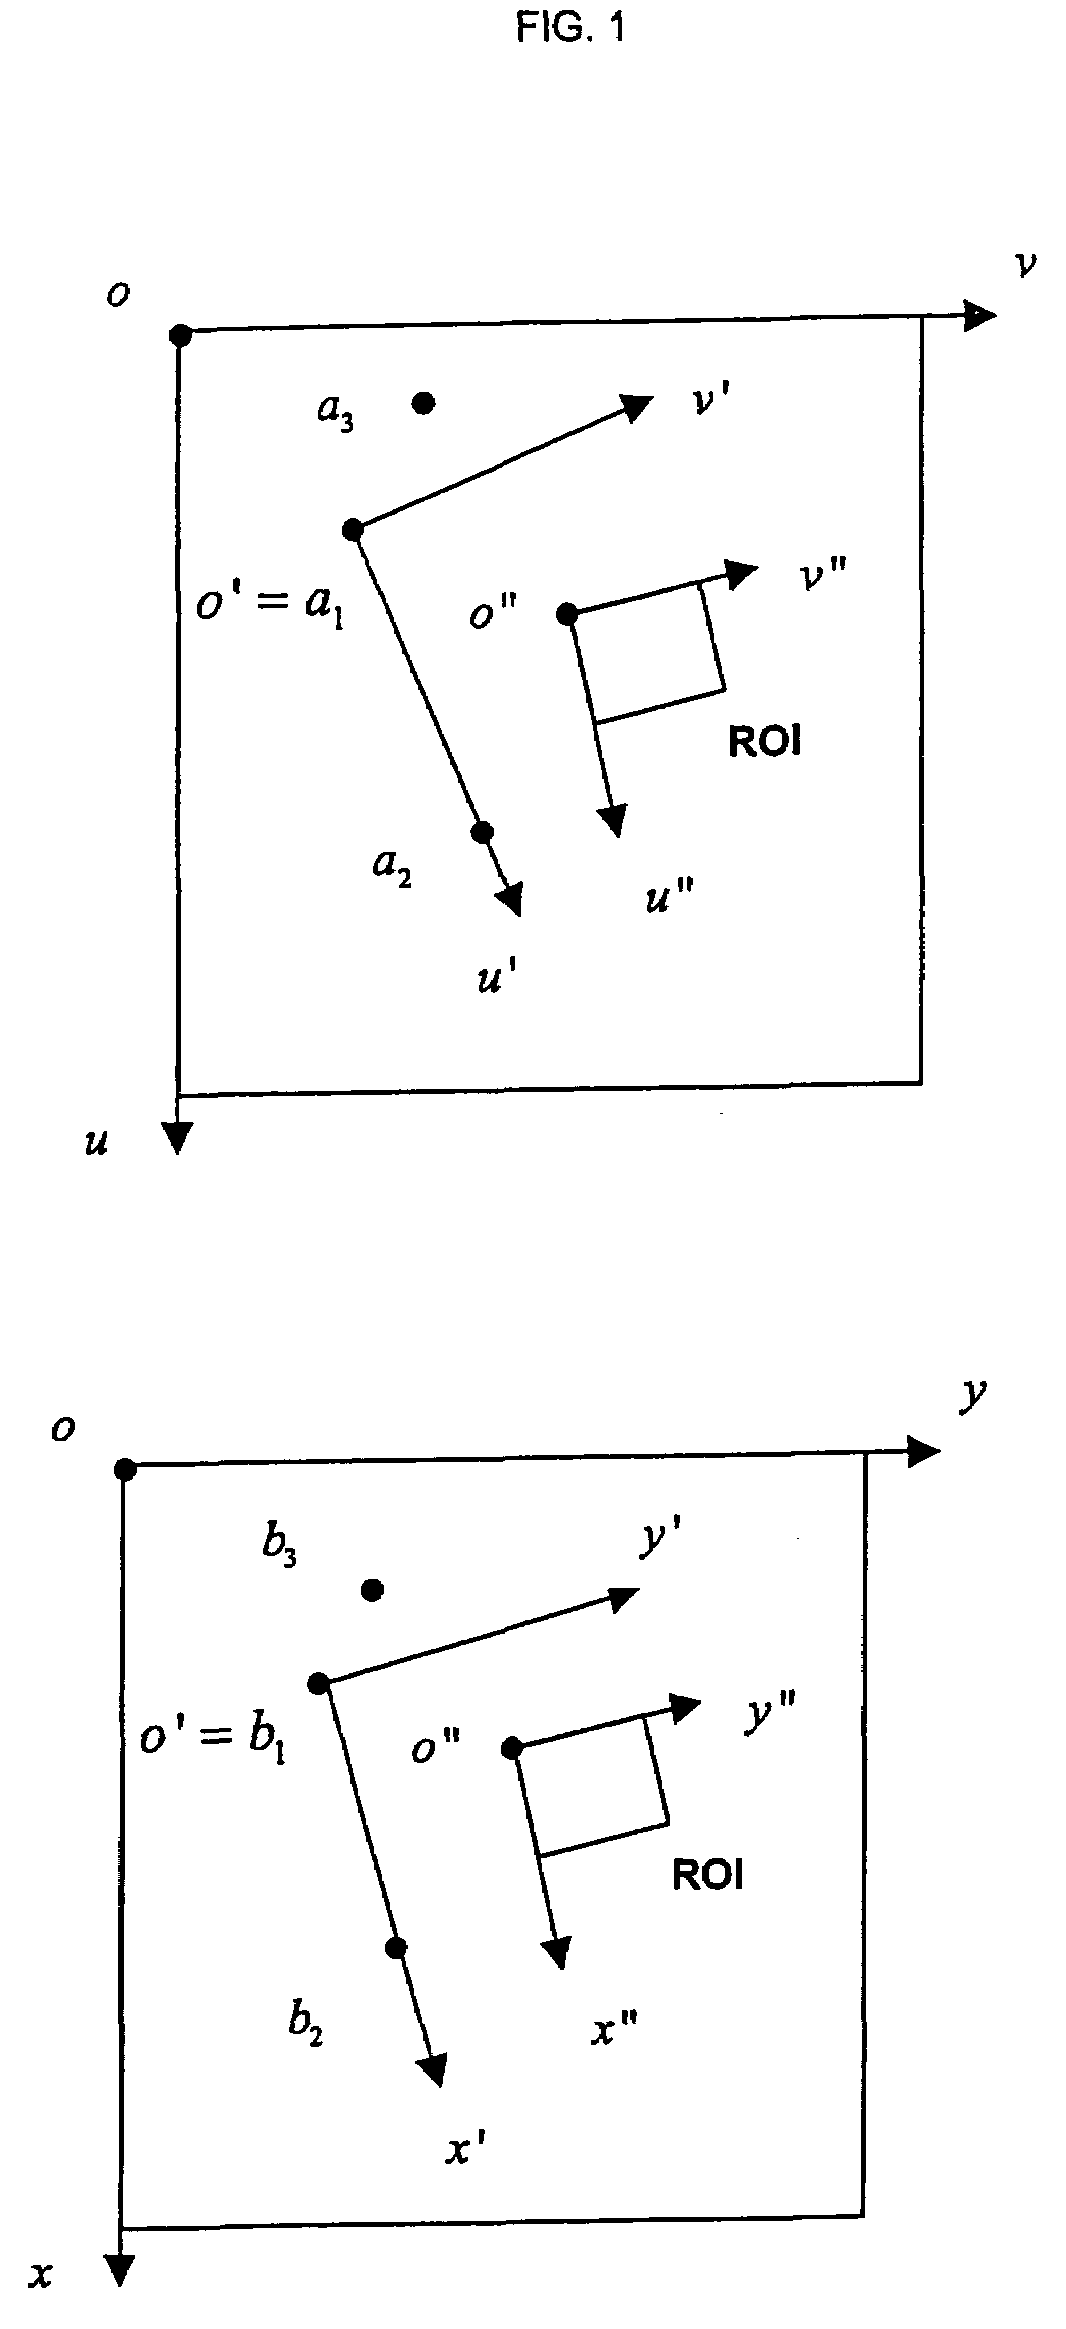 Method for automatically mapping of geometric objects in digital medical images